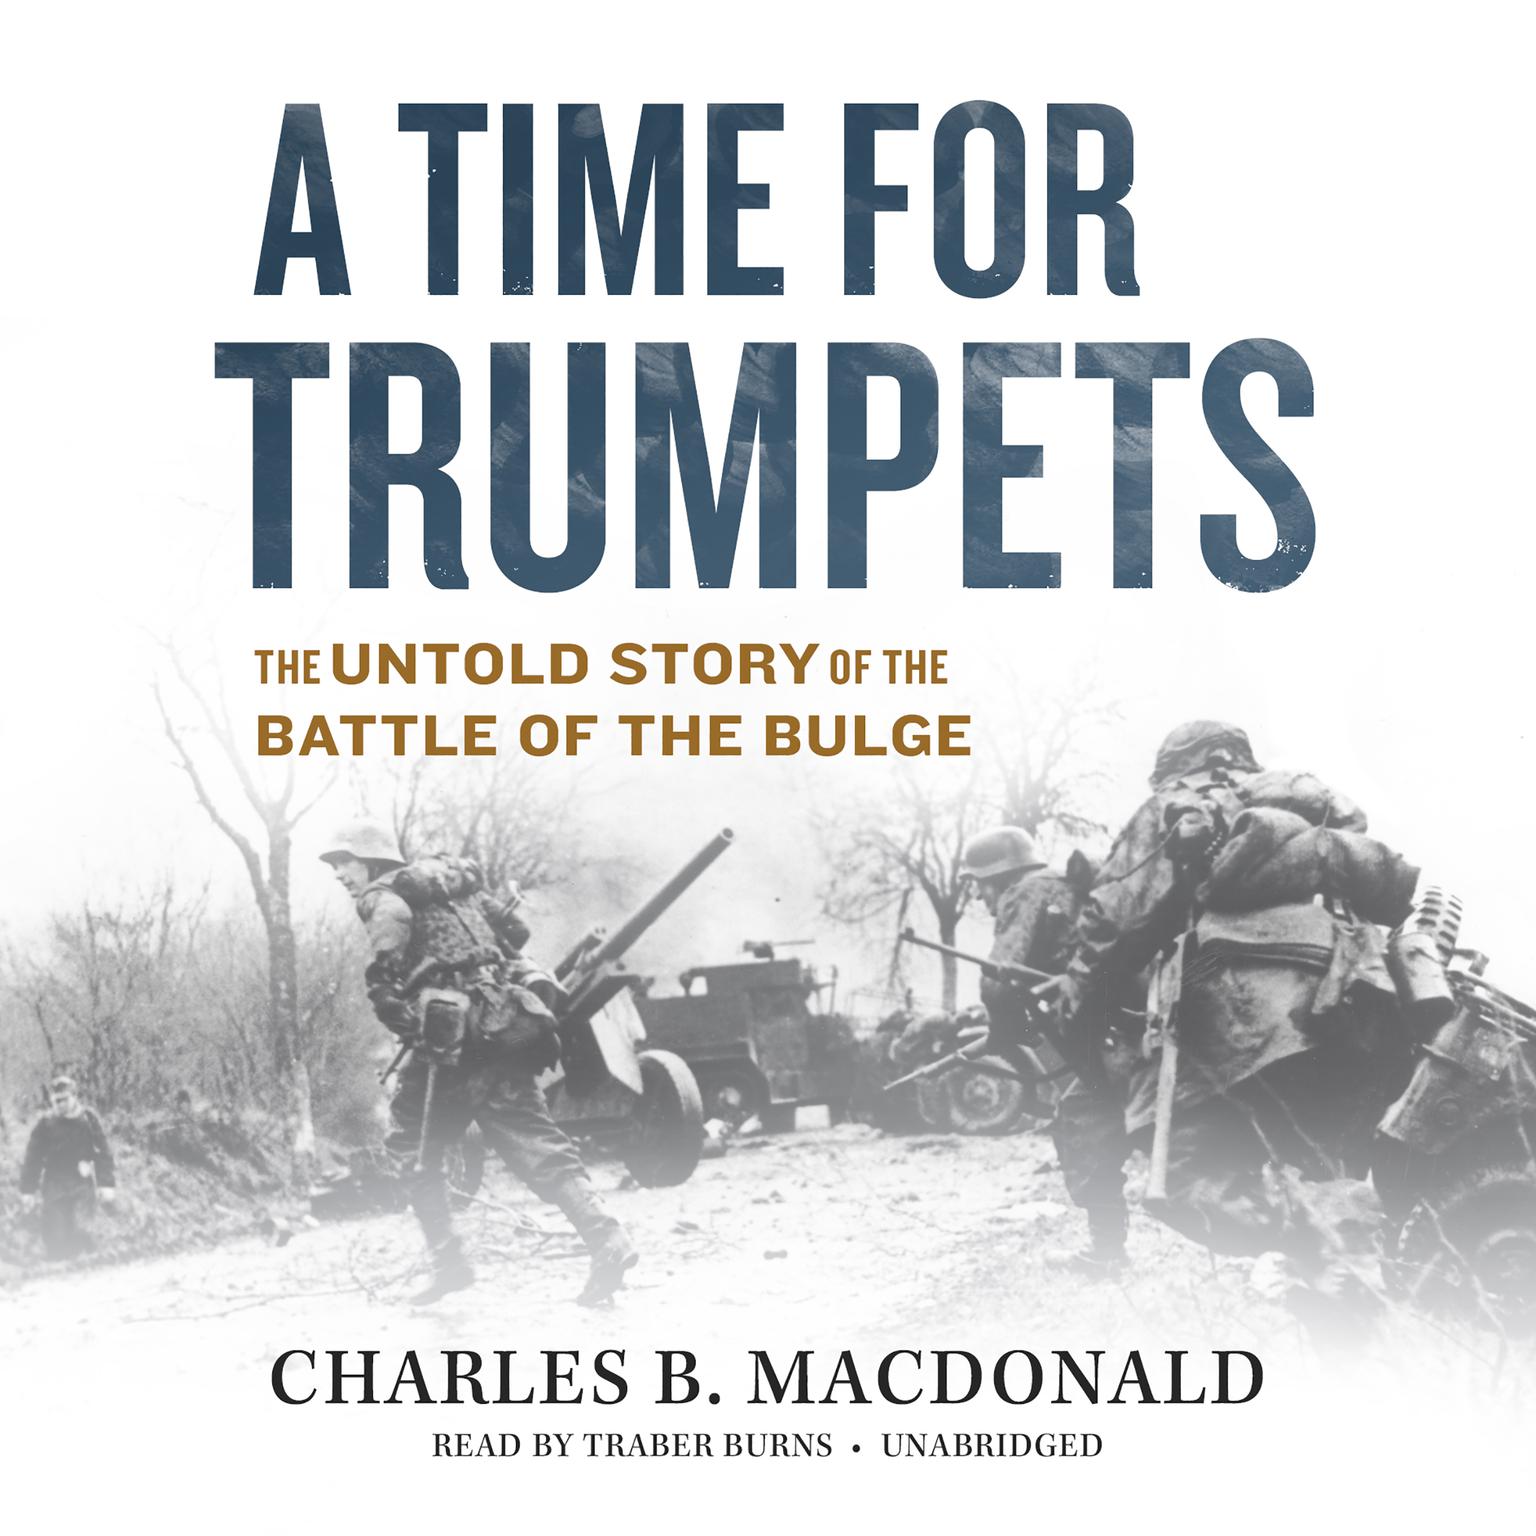 A Time for Trumpets: The Untold Story of the Battle of the Bulge Audiobook, by Charles B. MacDonald